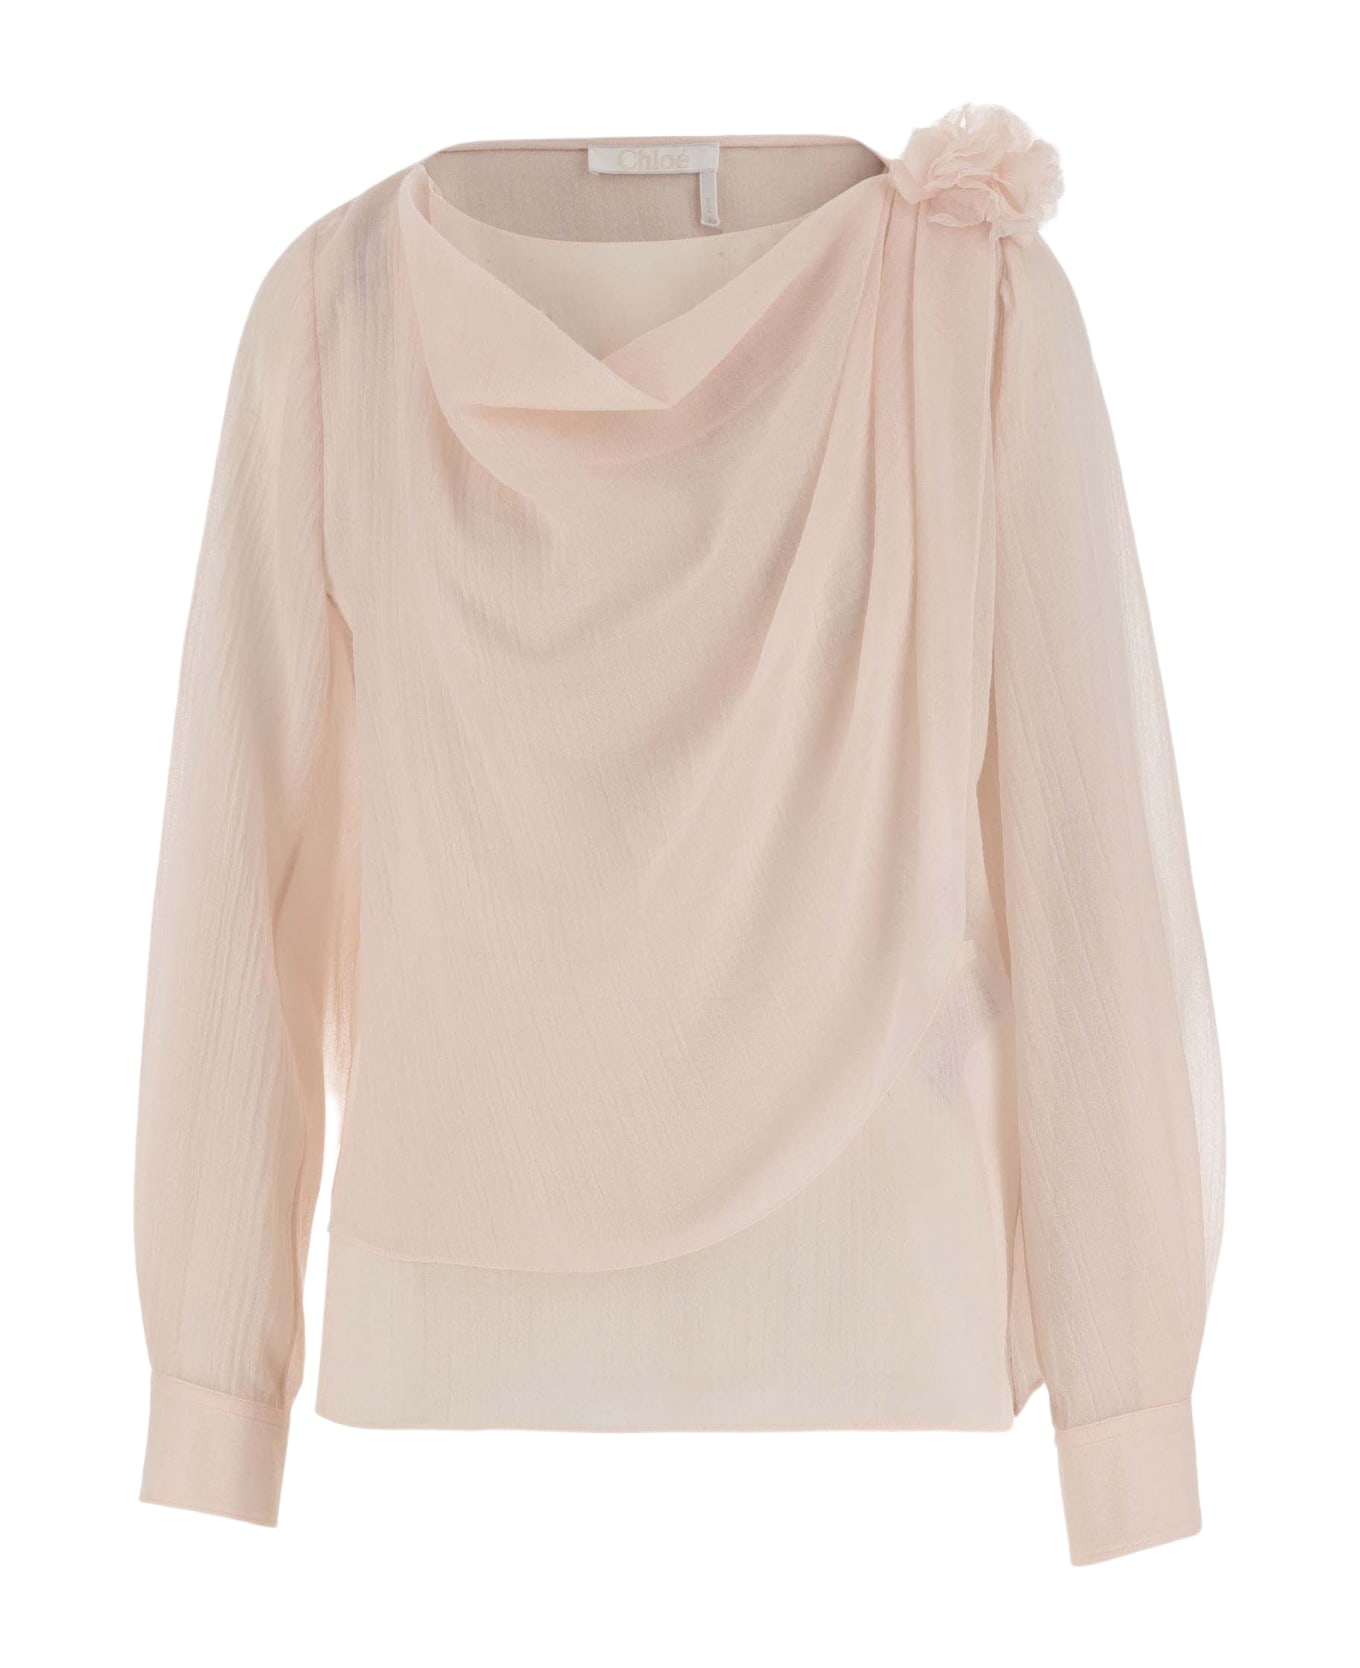 Chloé Draped Top With Boat Neckline - Pink